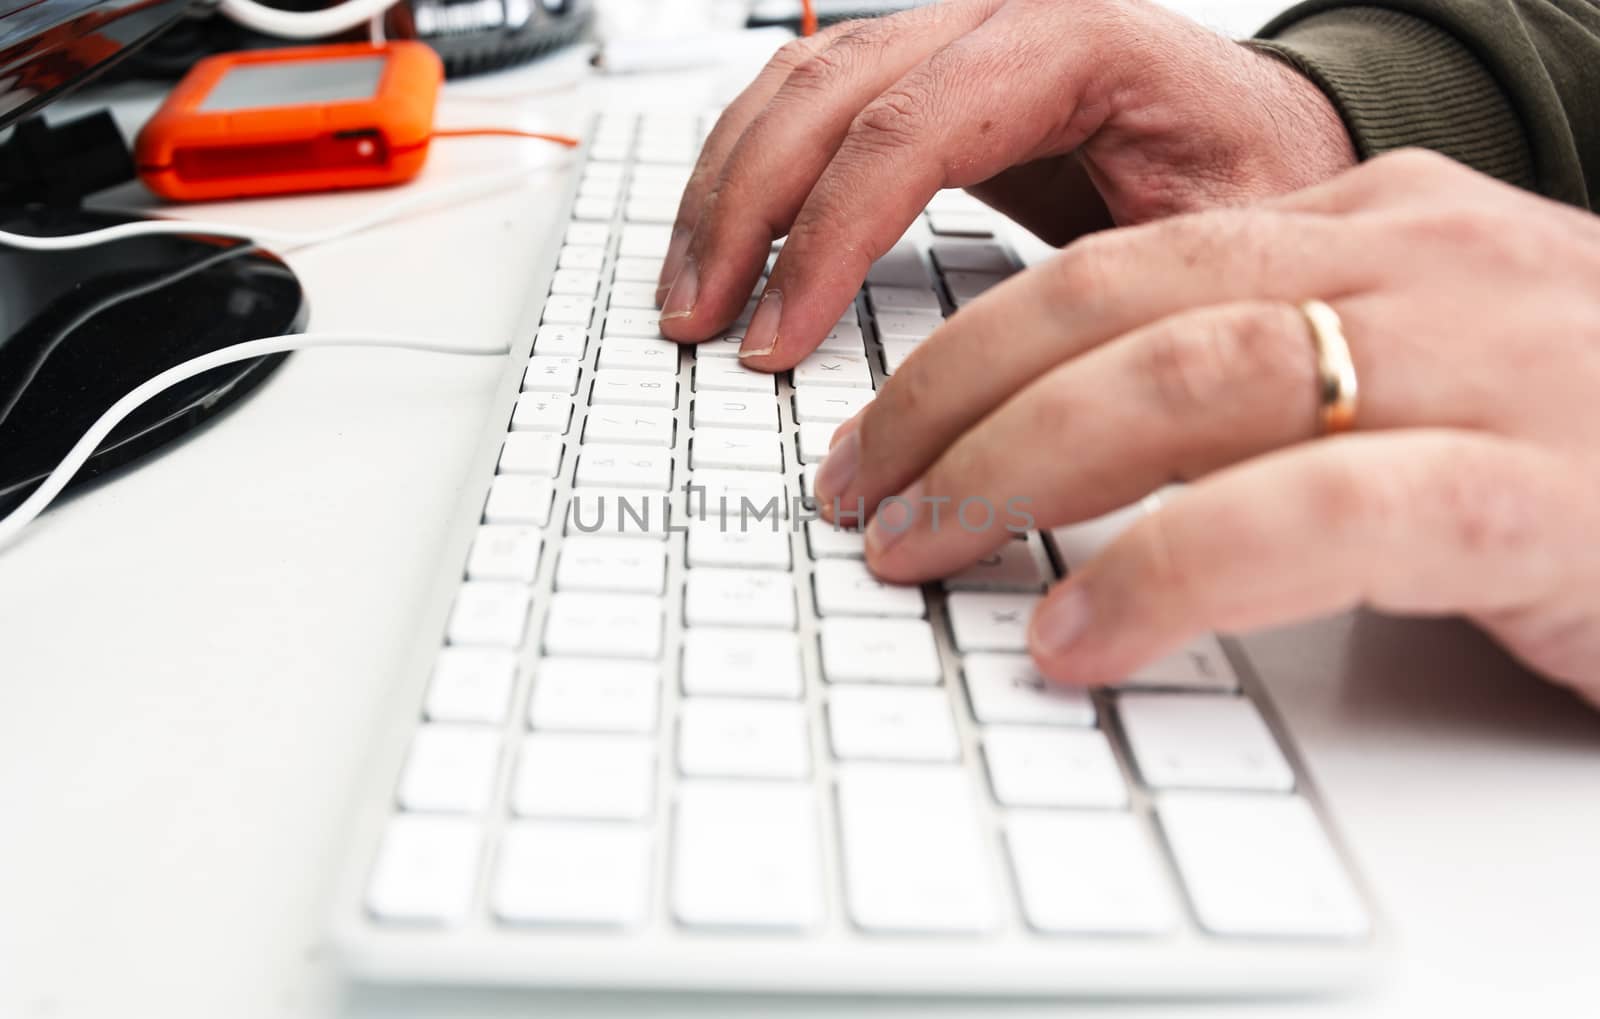 male hands typing keys on a white computer keyboard in an office. by rarrarorro